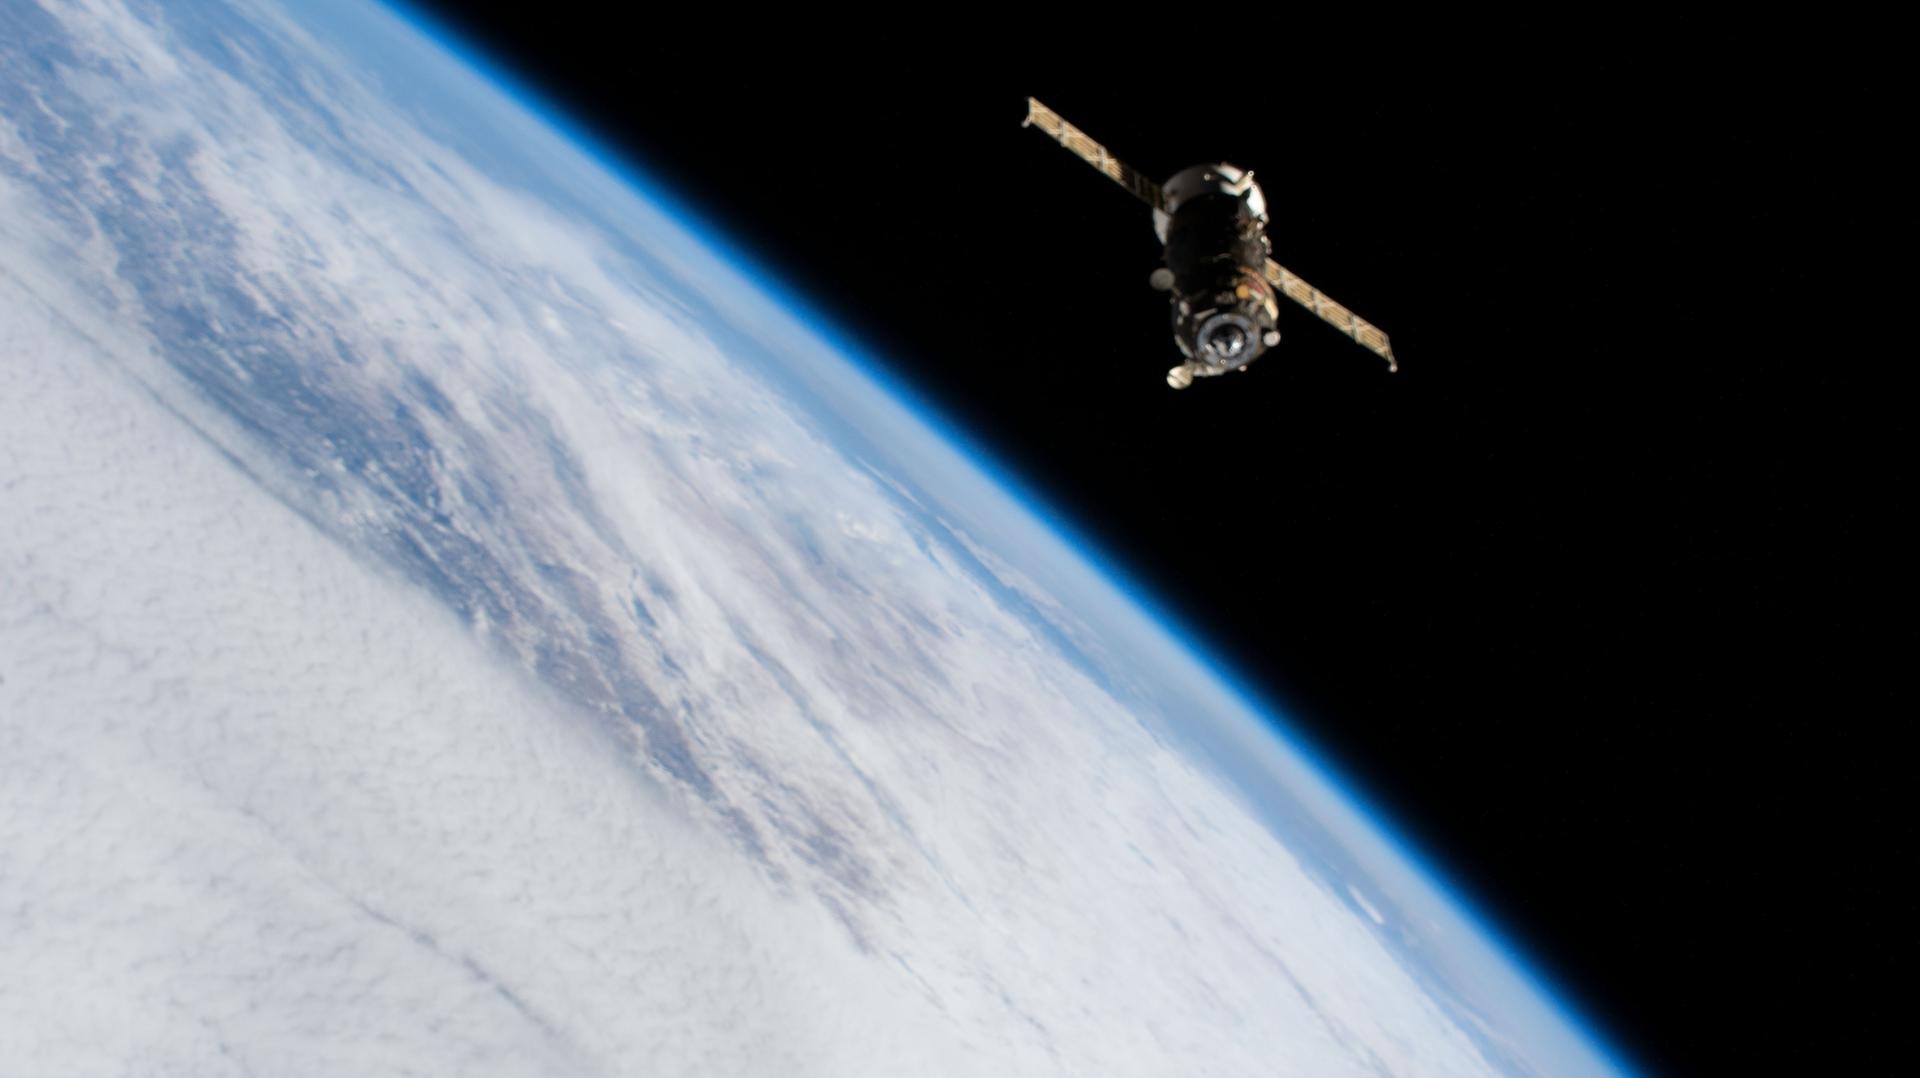 The Russian cargo resupply craft Progress 76 departs the International Space Station at the end of its mission in 2021.